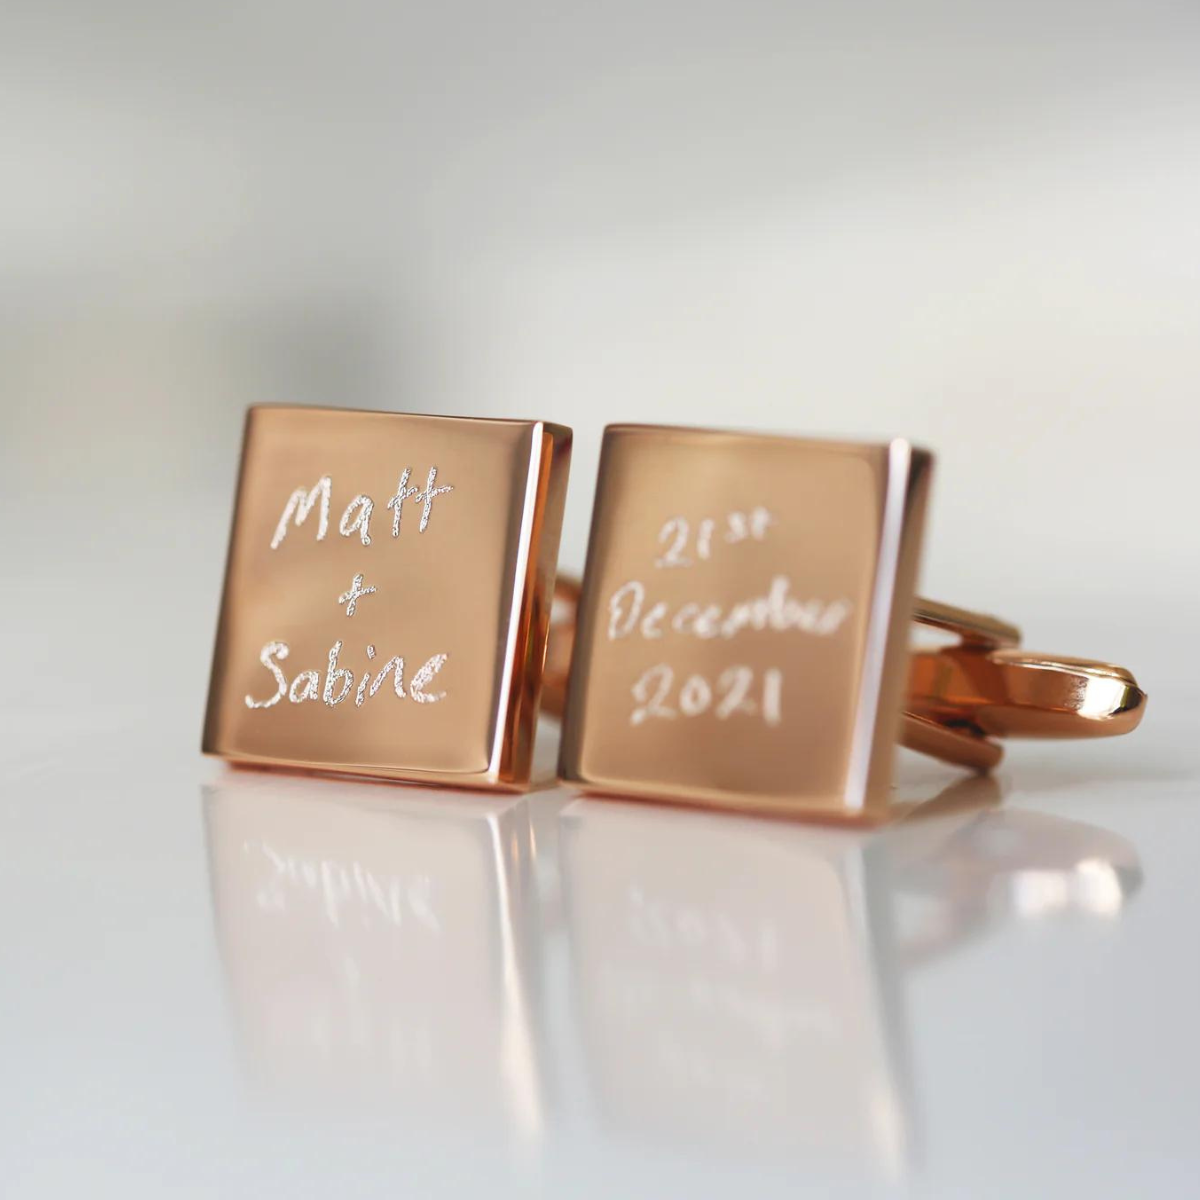 Image of a pair of cufflinks that can each be engraved with your own handwritten message. The cufflinks are available with either a silver or rose gold coloured finish.